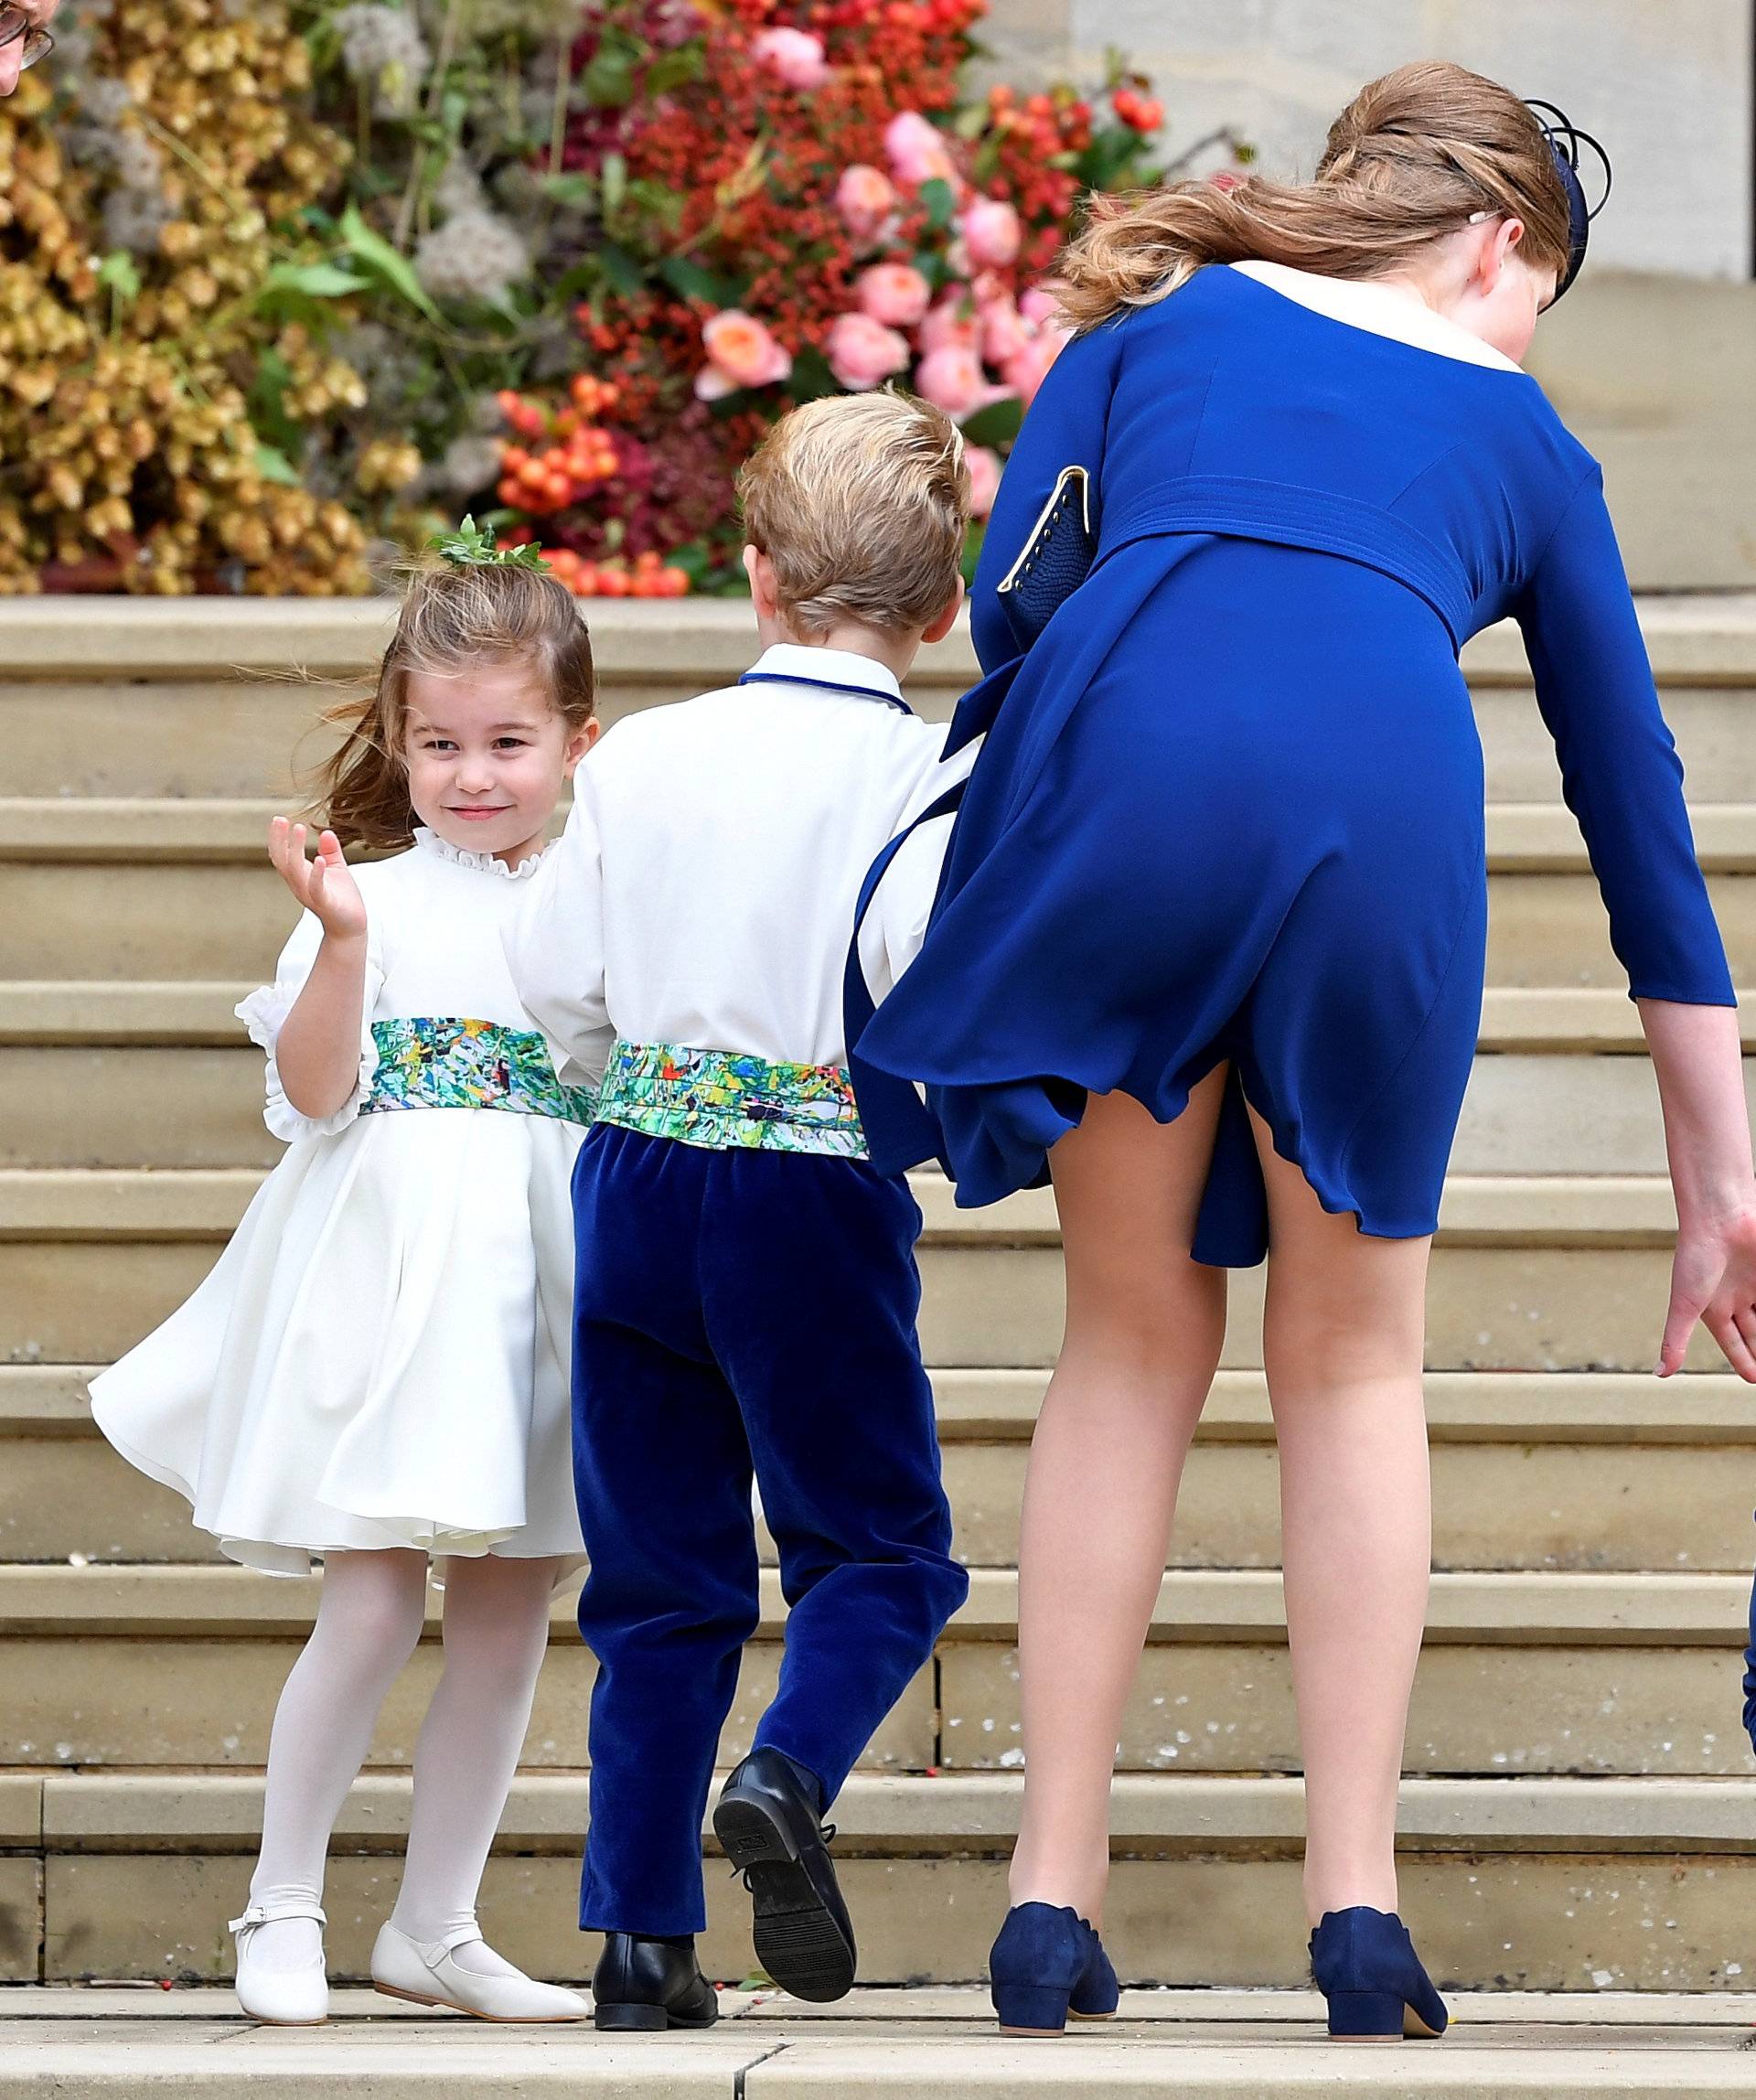 Princess Charlotte of Cambridge arrives with bridesmaids and pageboys for the royal wedding of Princess Eugenie and Jack Brooksbank at St George's Chapel in Windsor Castle, Windsor